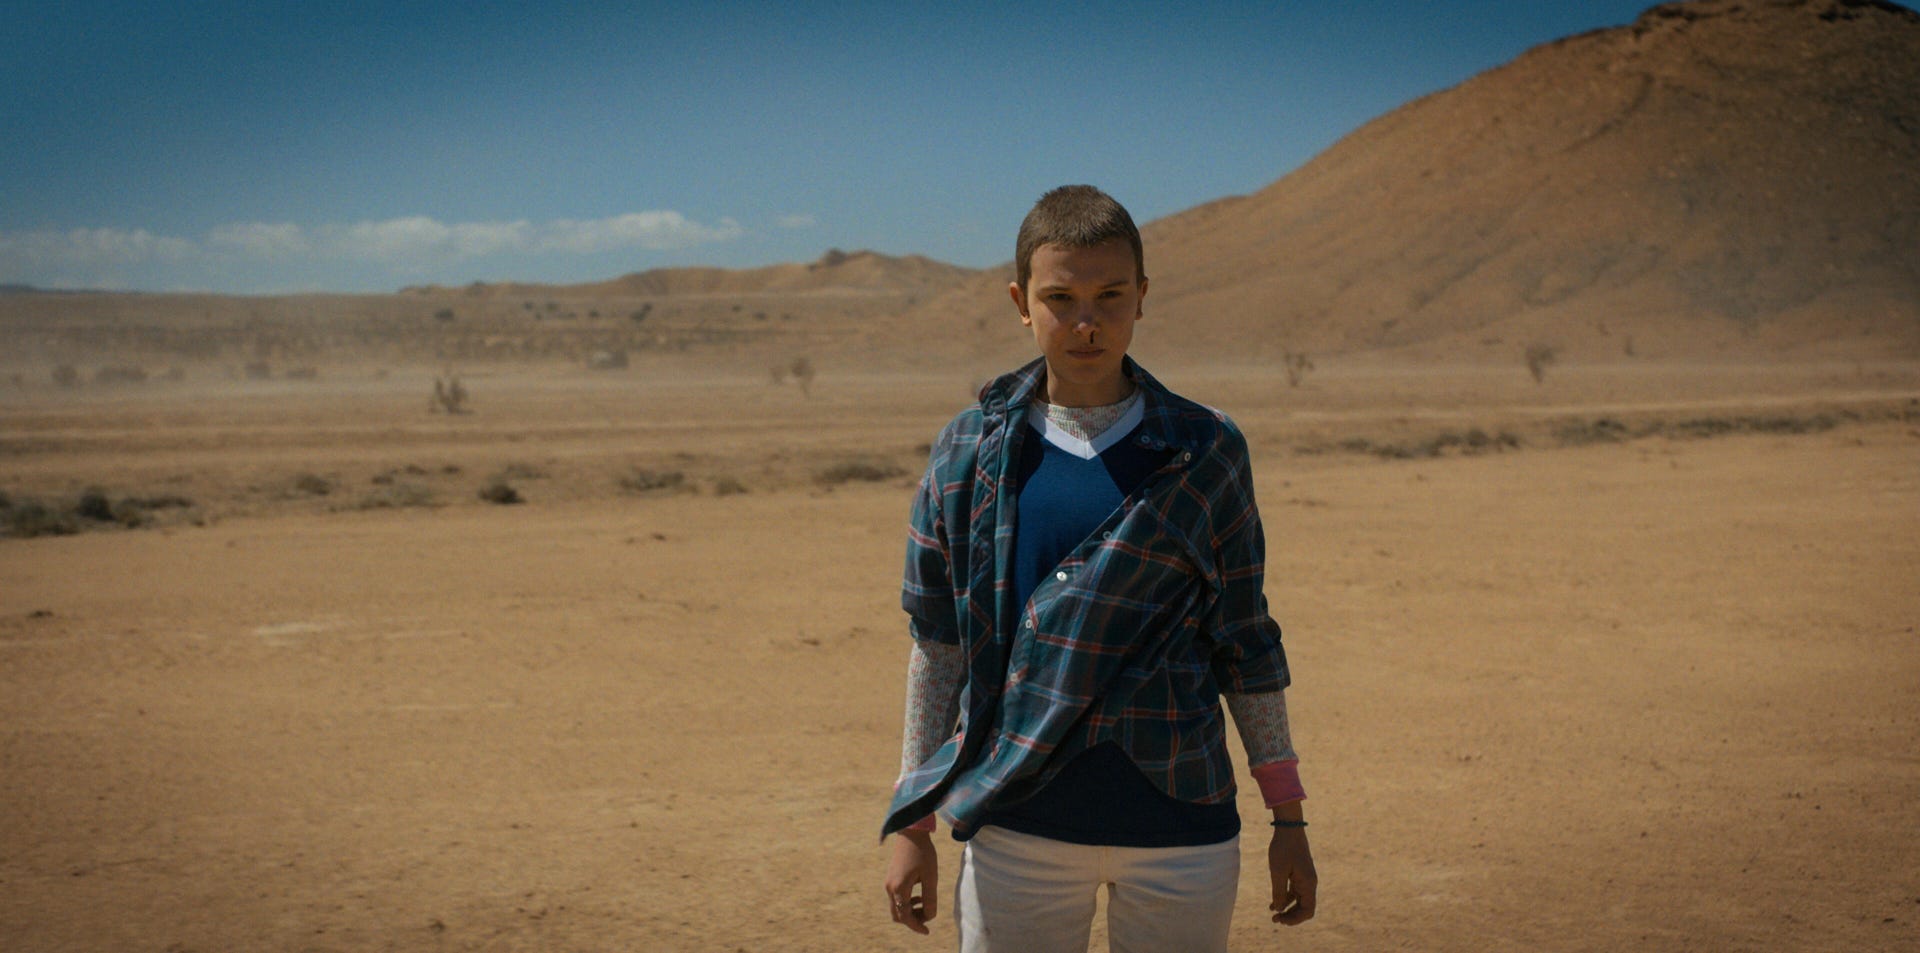 A battered but unbowed Eleven stands in the desert in Netflix series Stranger Things.